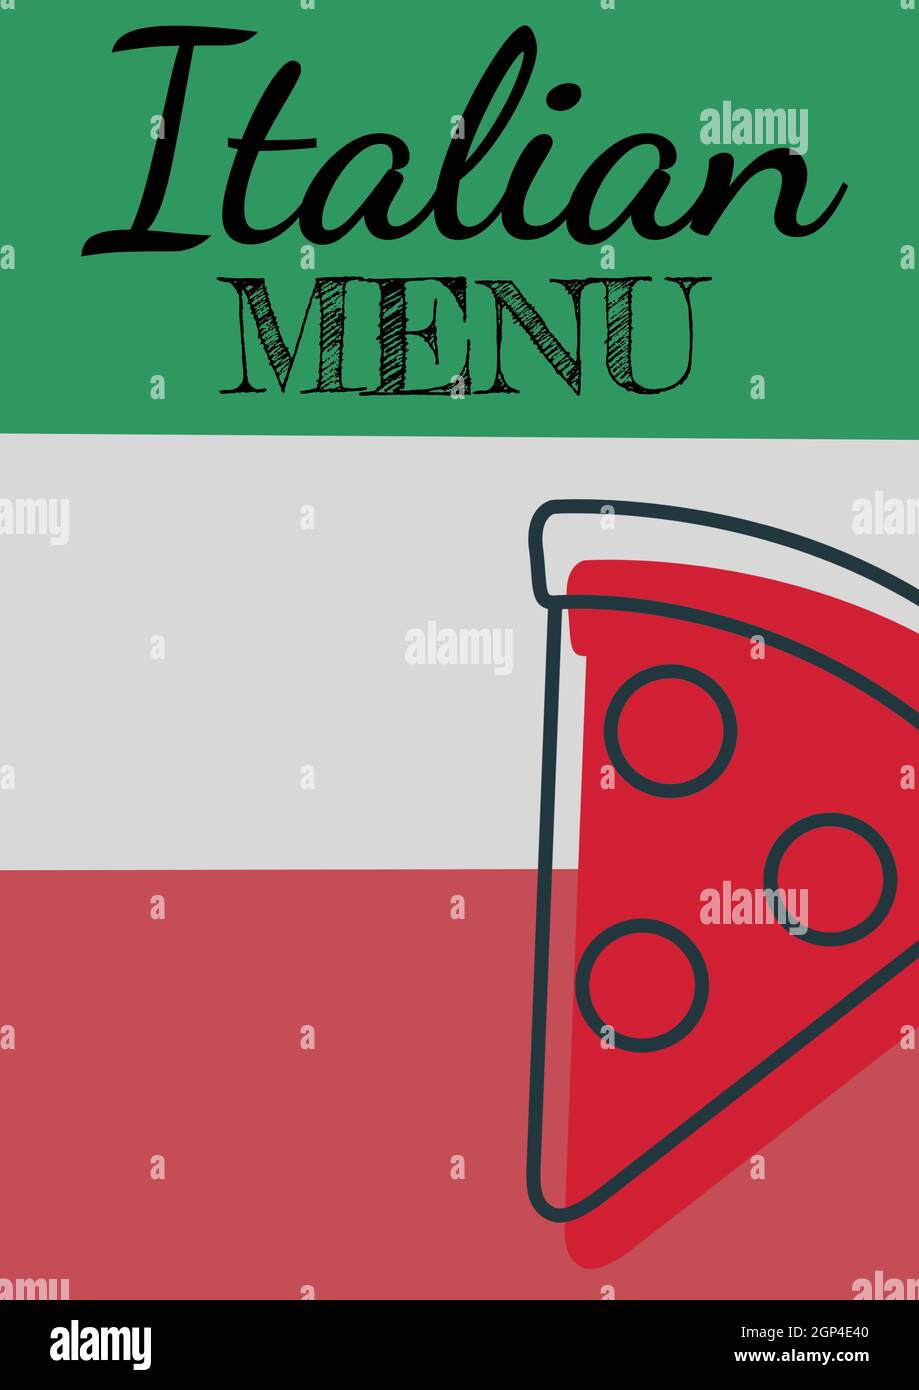 Composition of italian menu text and pizza icon on colourful background Stock Photo